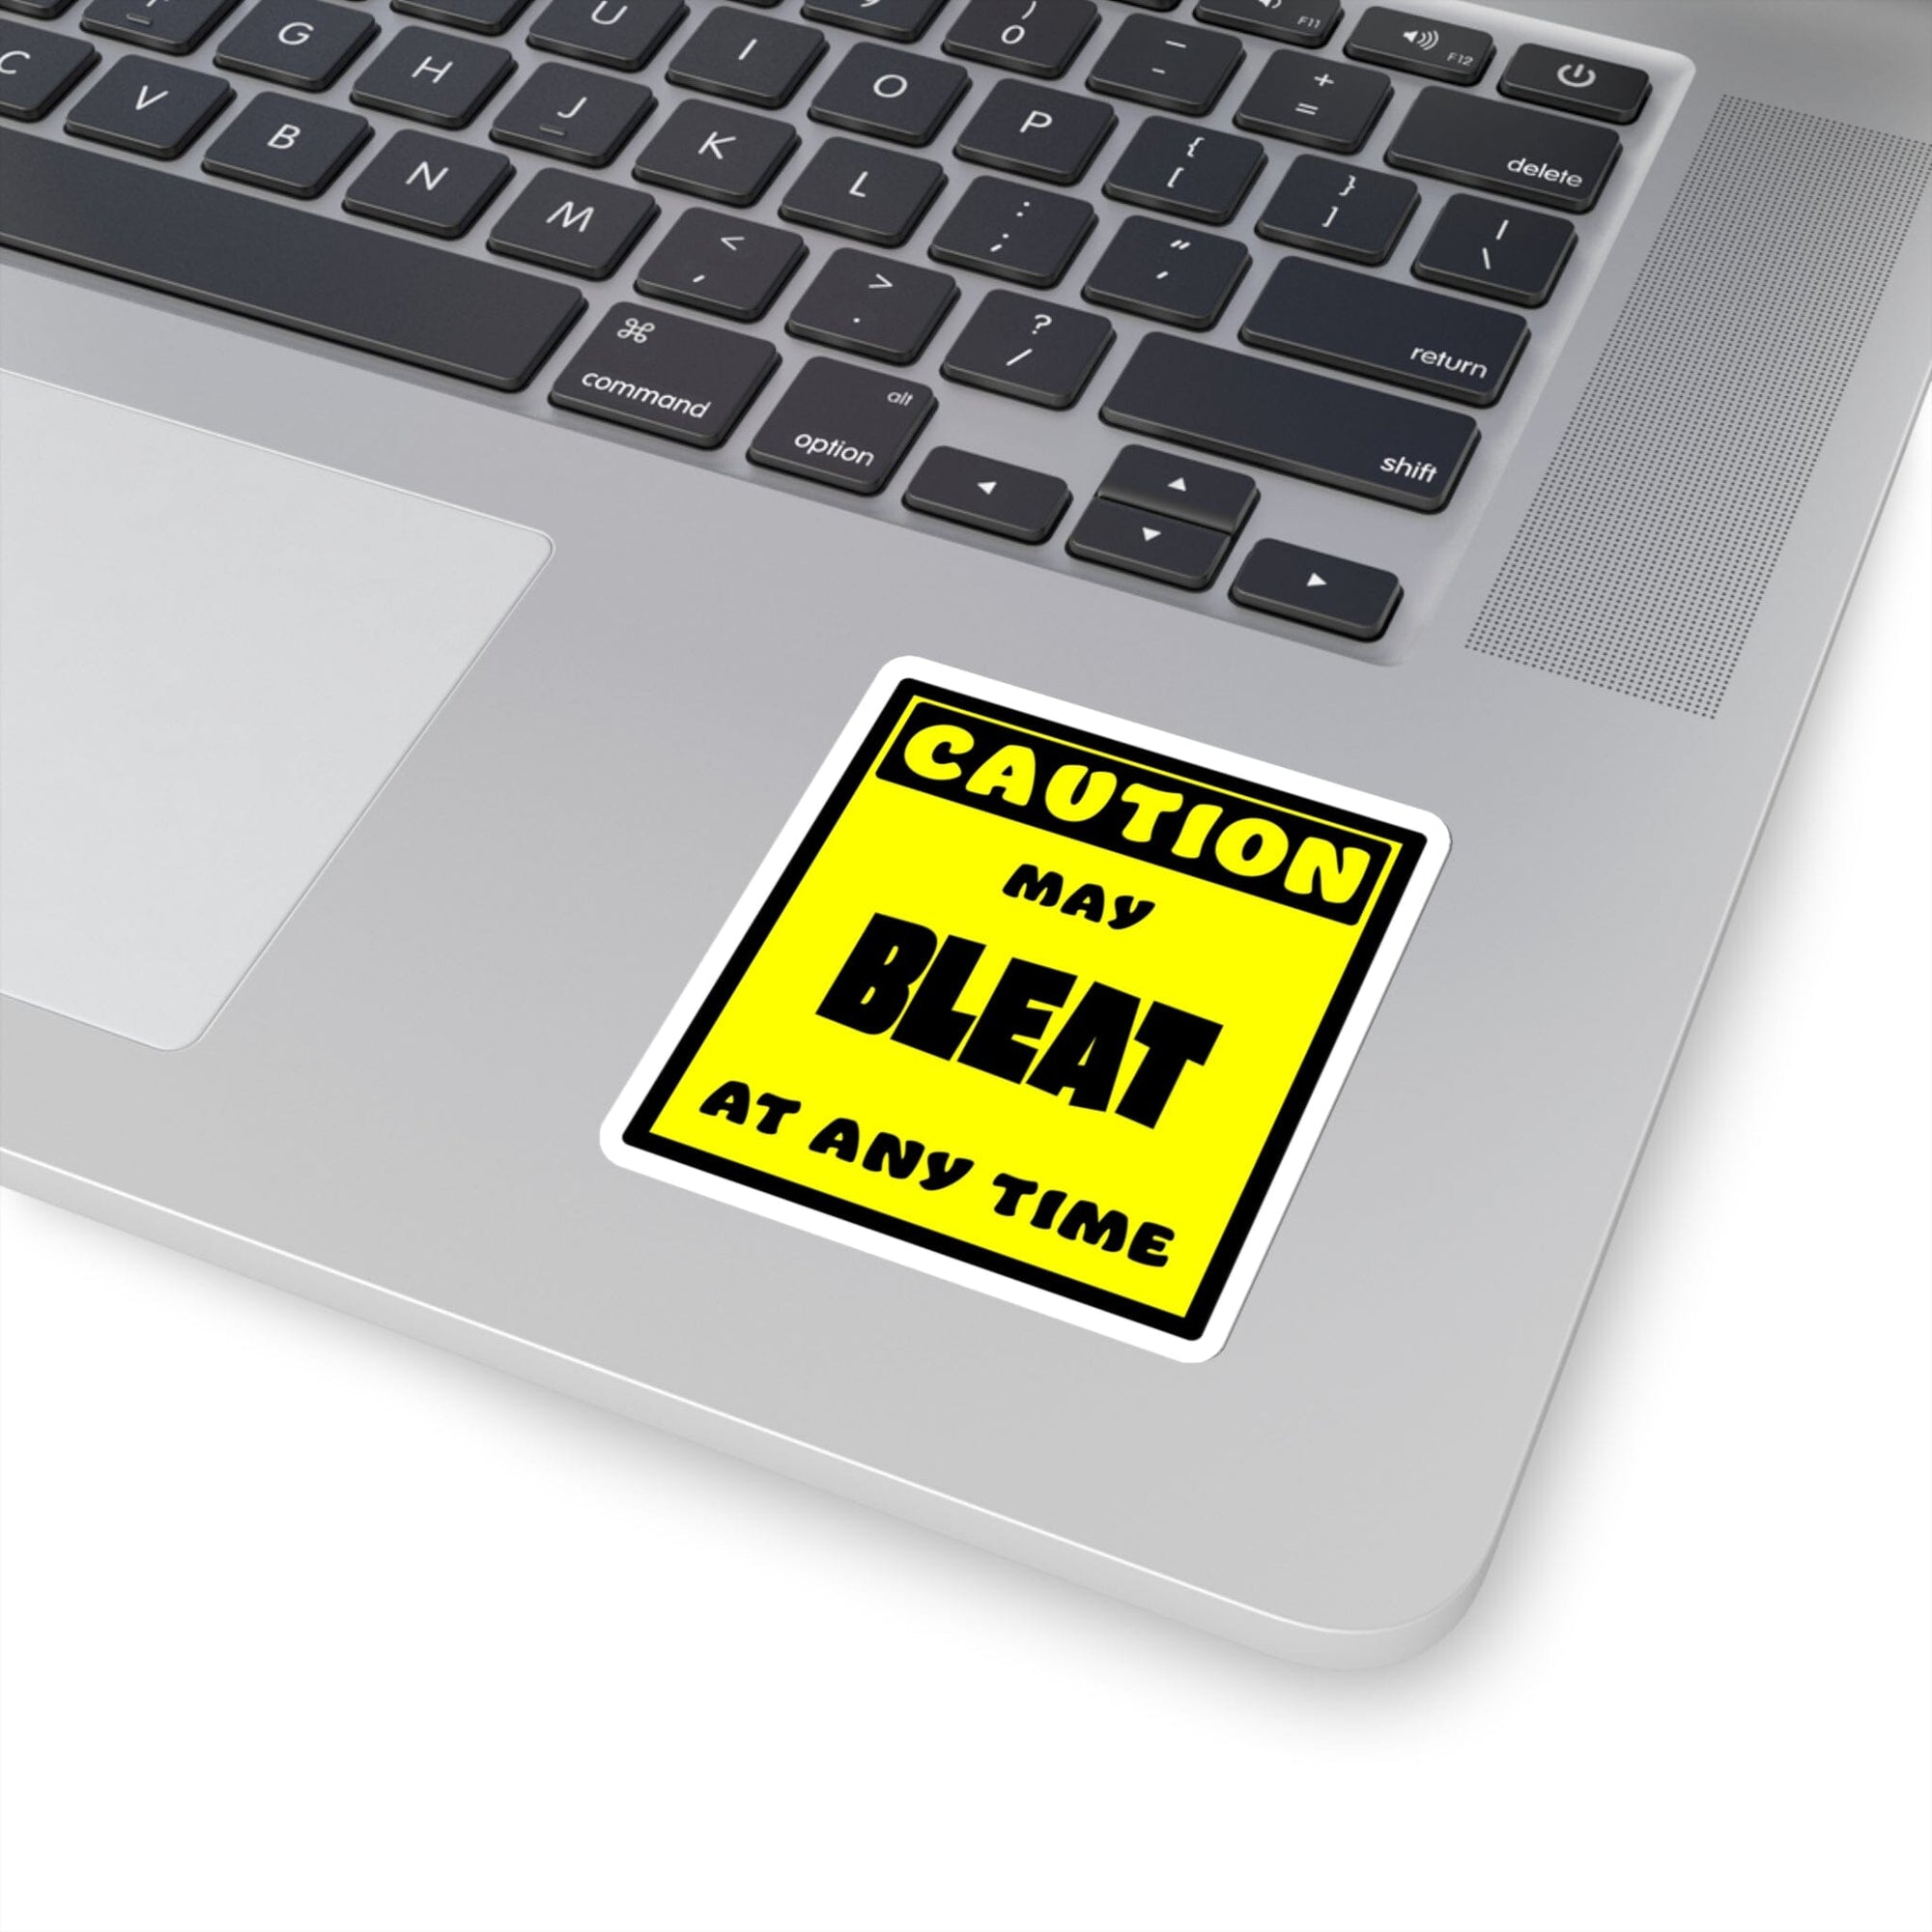 CAUTION! May BLEAT at any time! - Sticker Sticker AFLT-Whootorca 